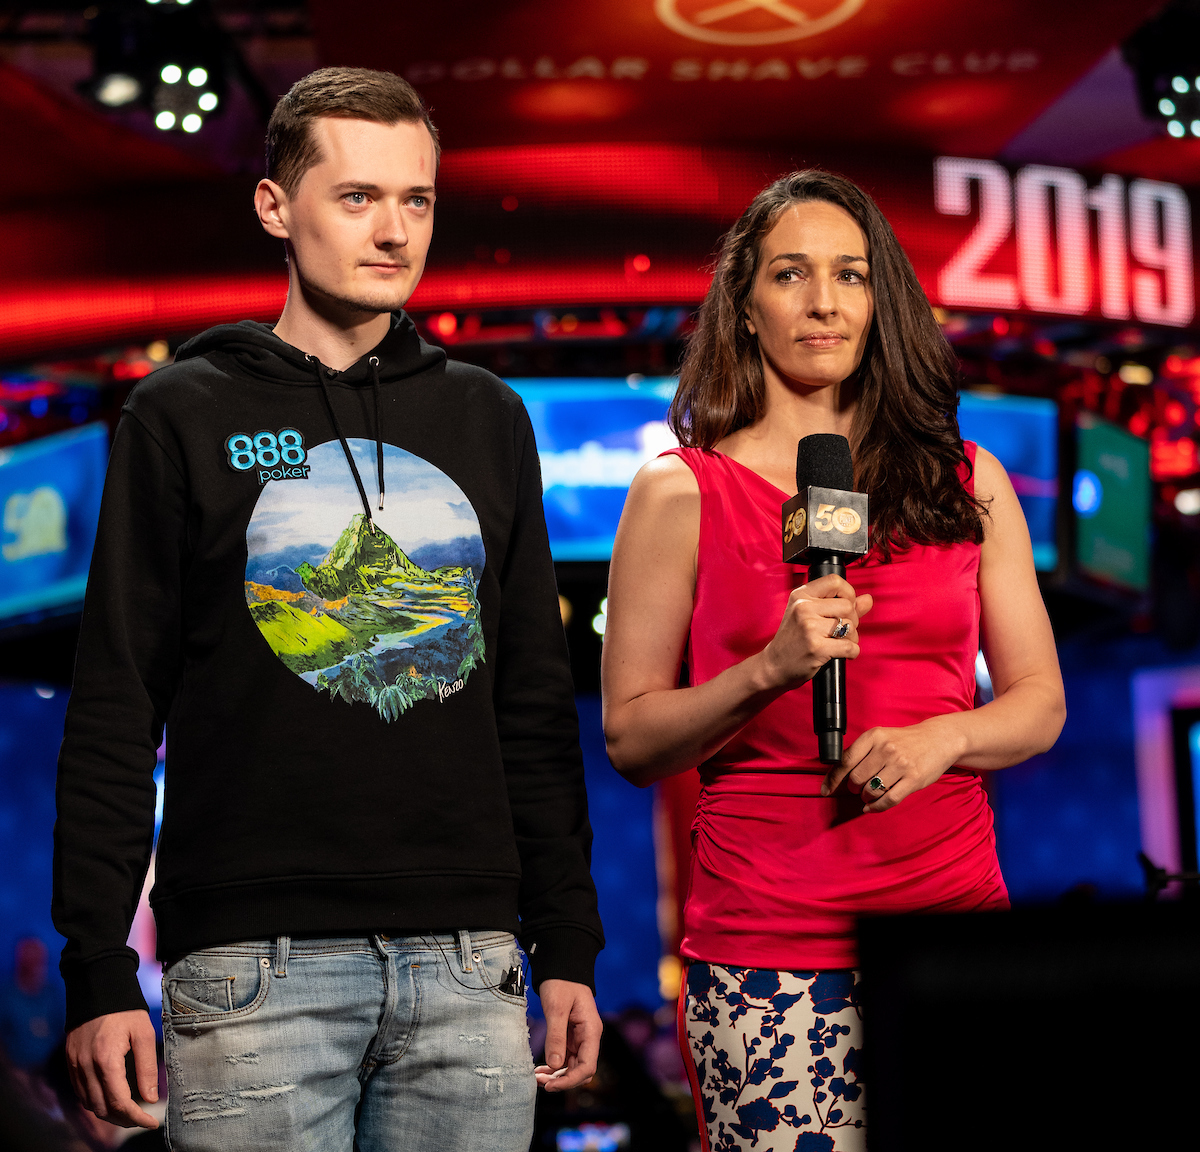 Nick Marchington on Defense Following WSOP Main Event Backer Scamming Accusations